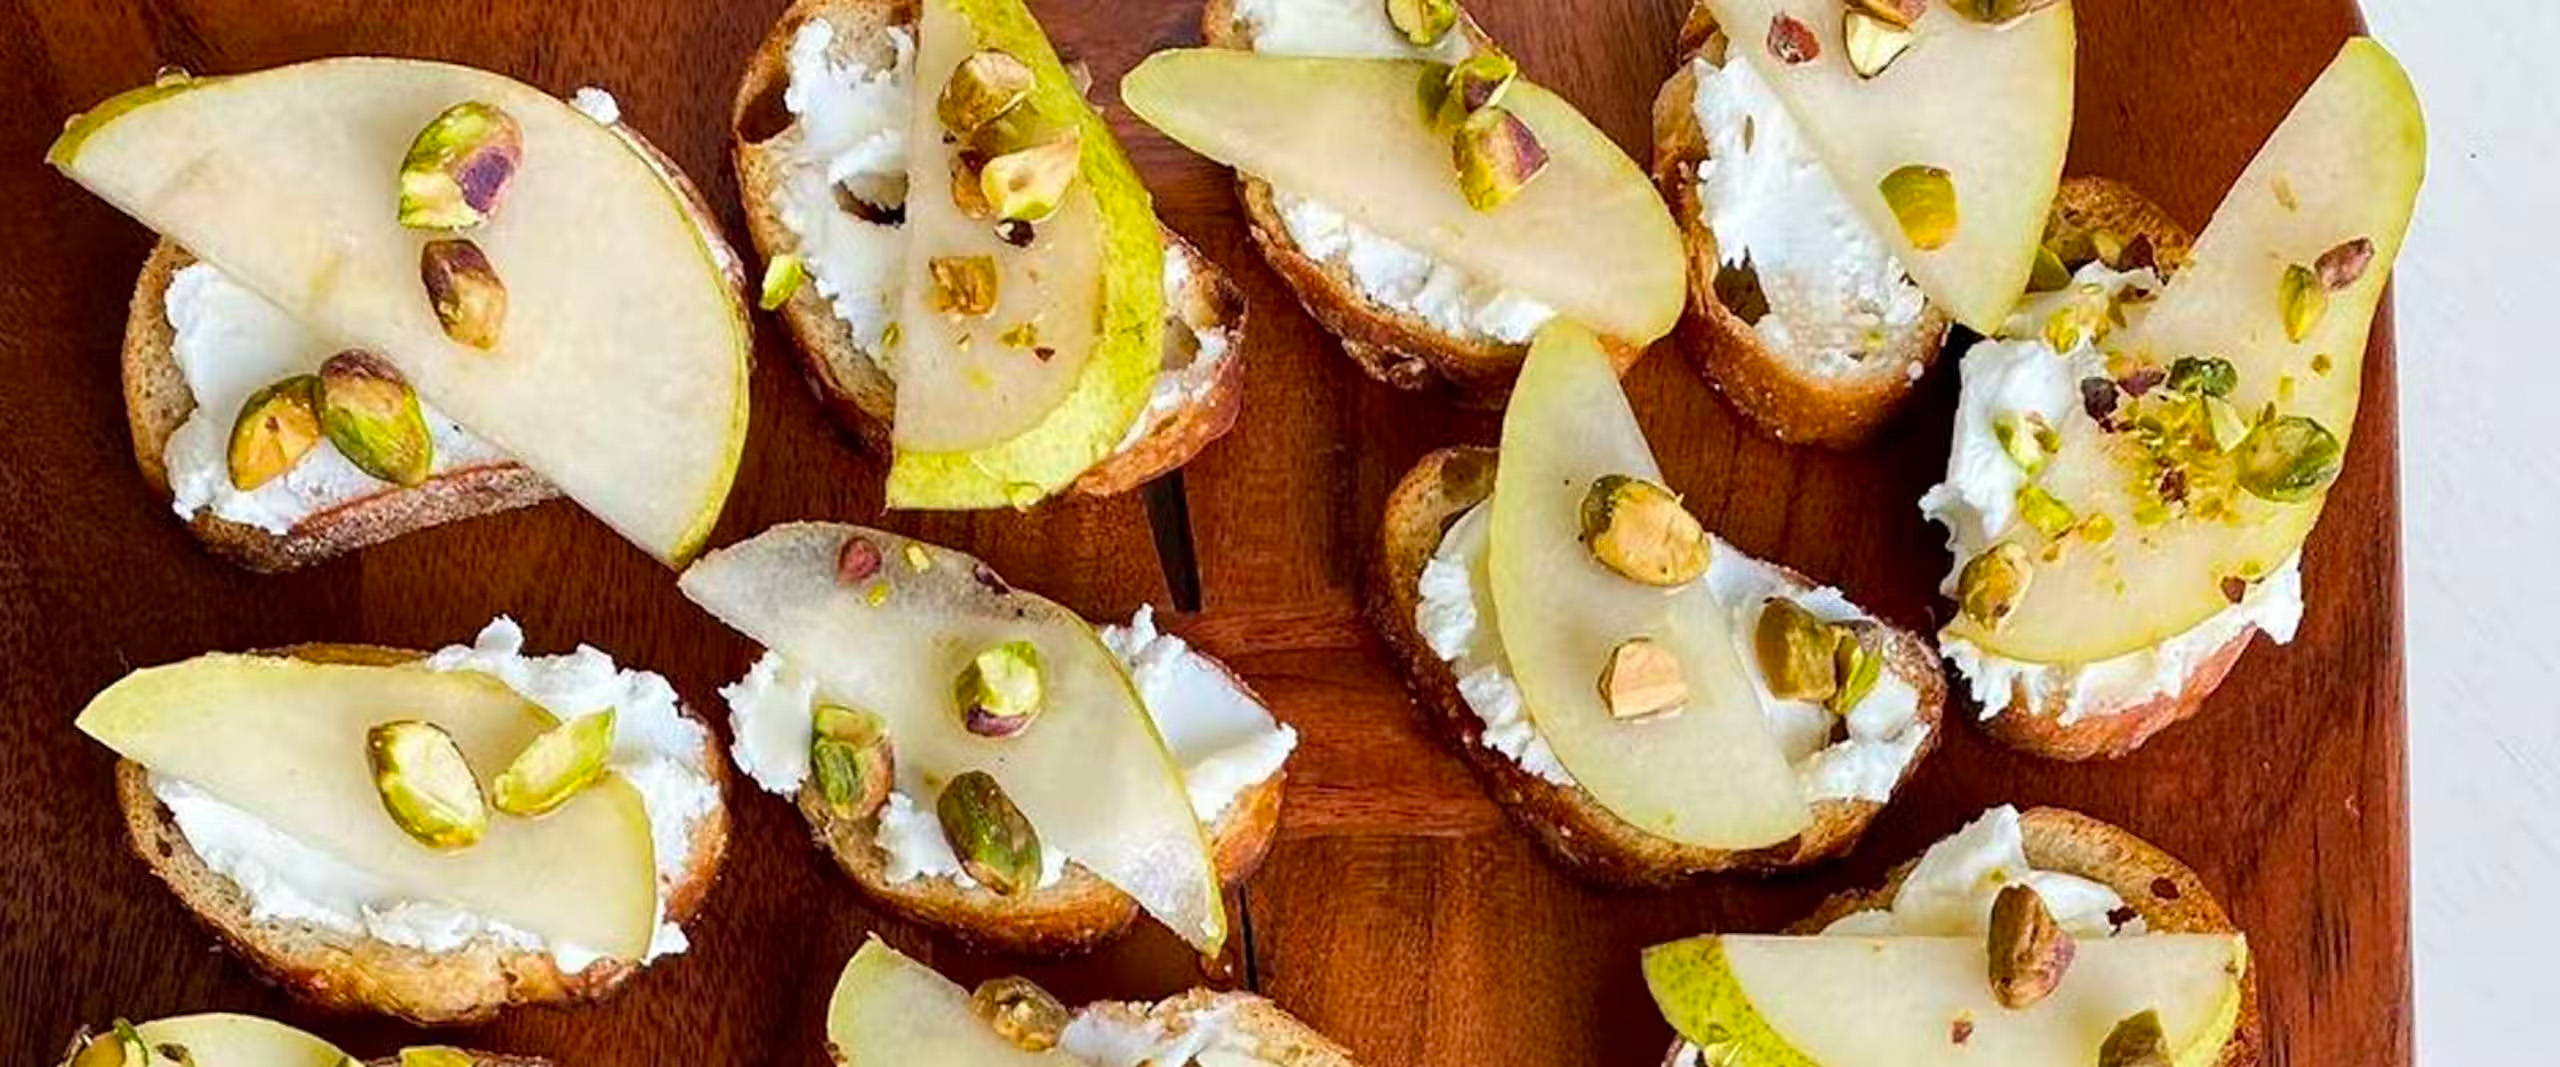 Overhead view of Crostini with Goat Cheese, Pear & Honey on a wooden platter.